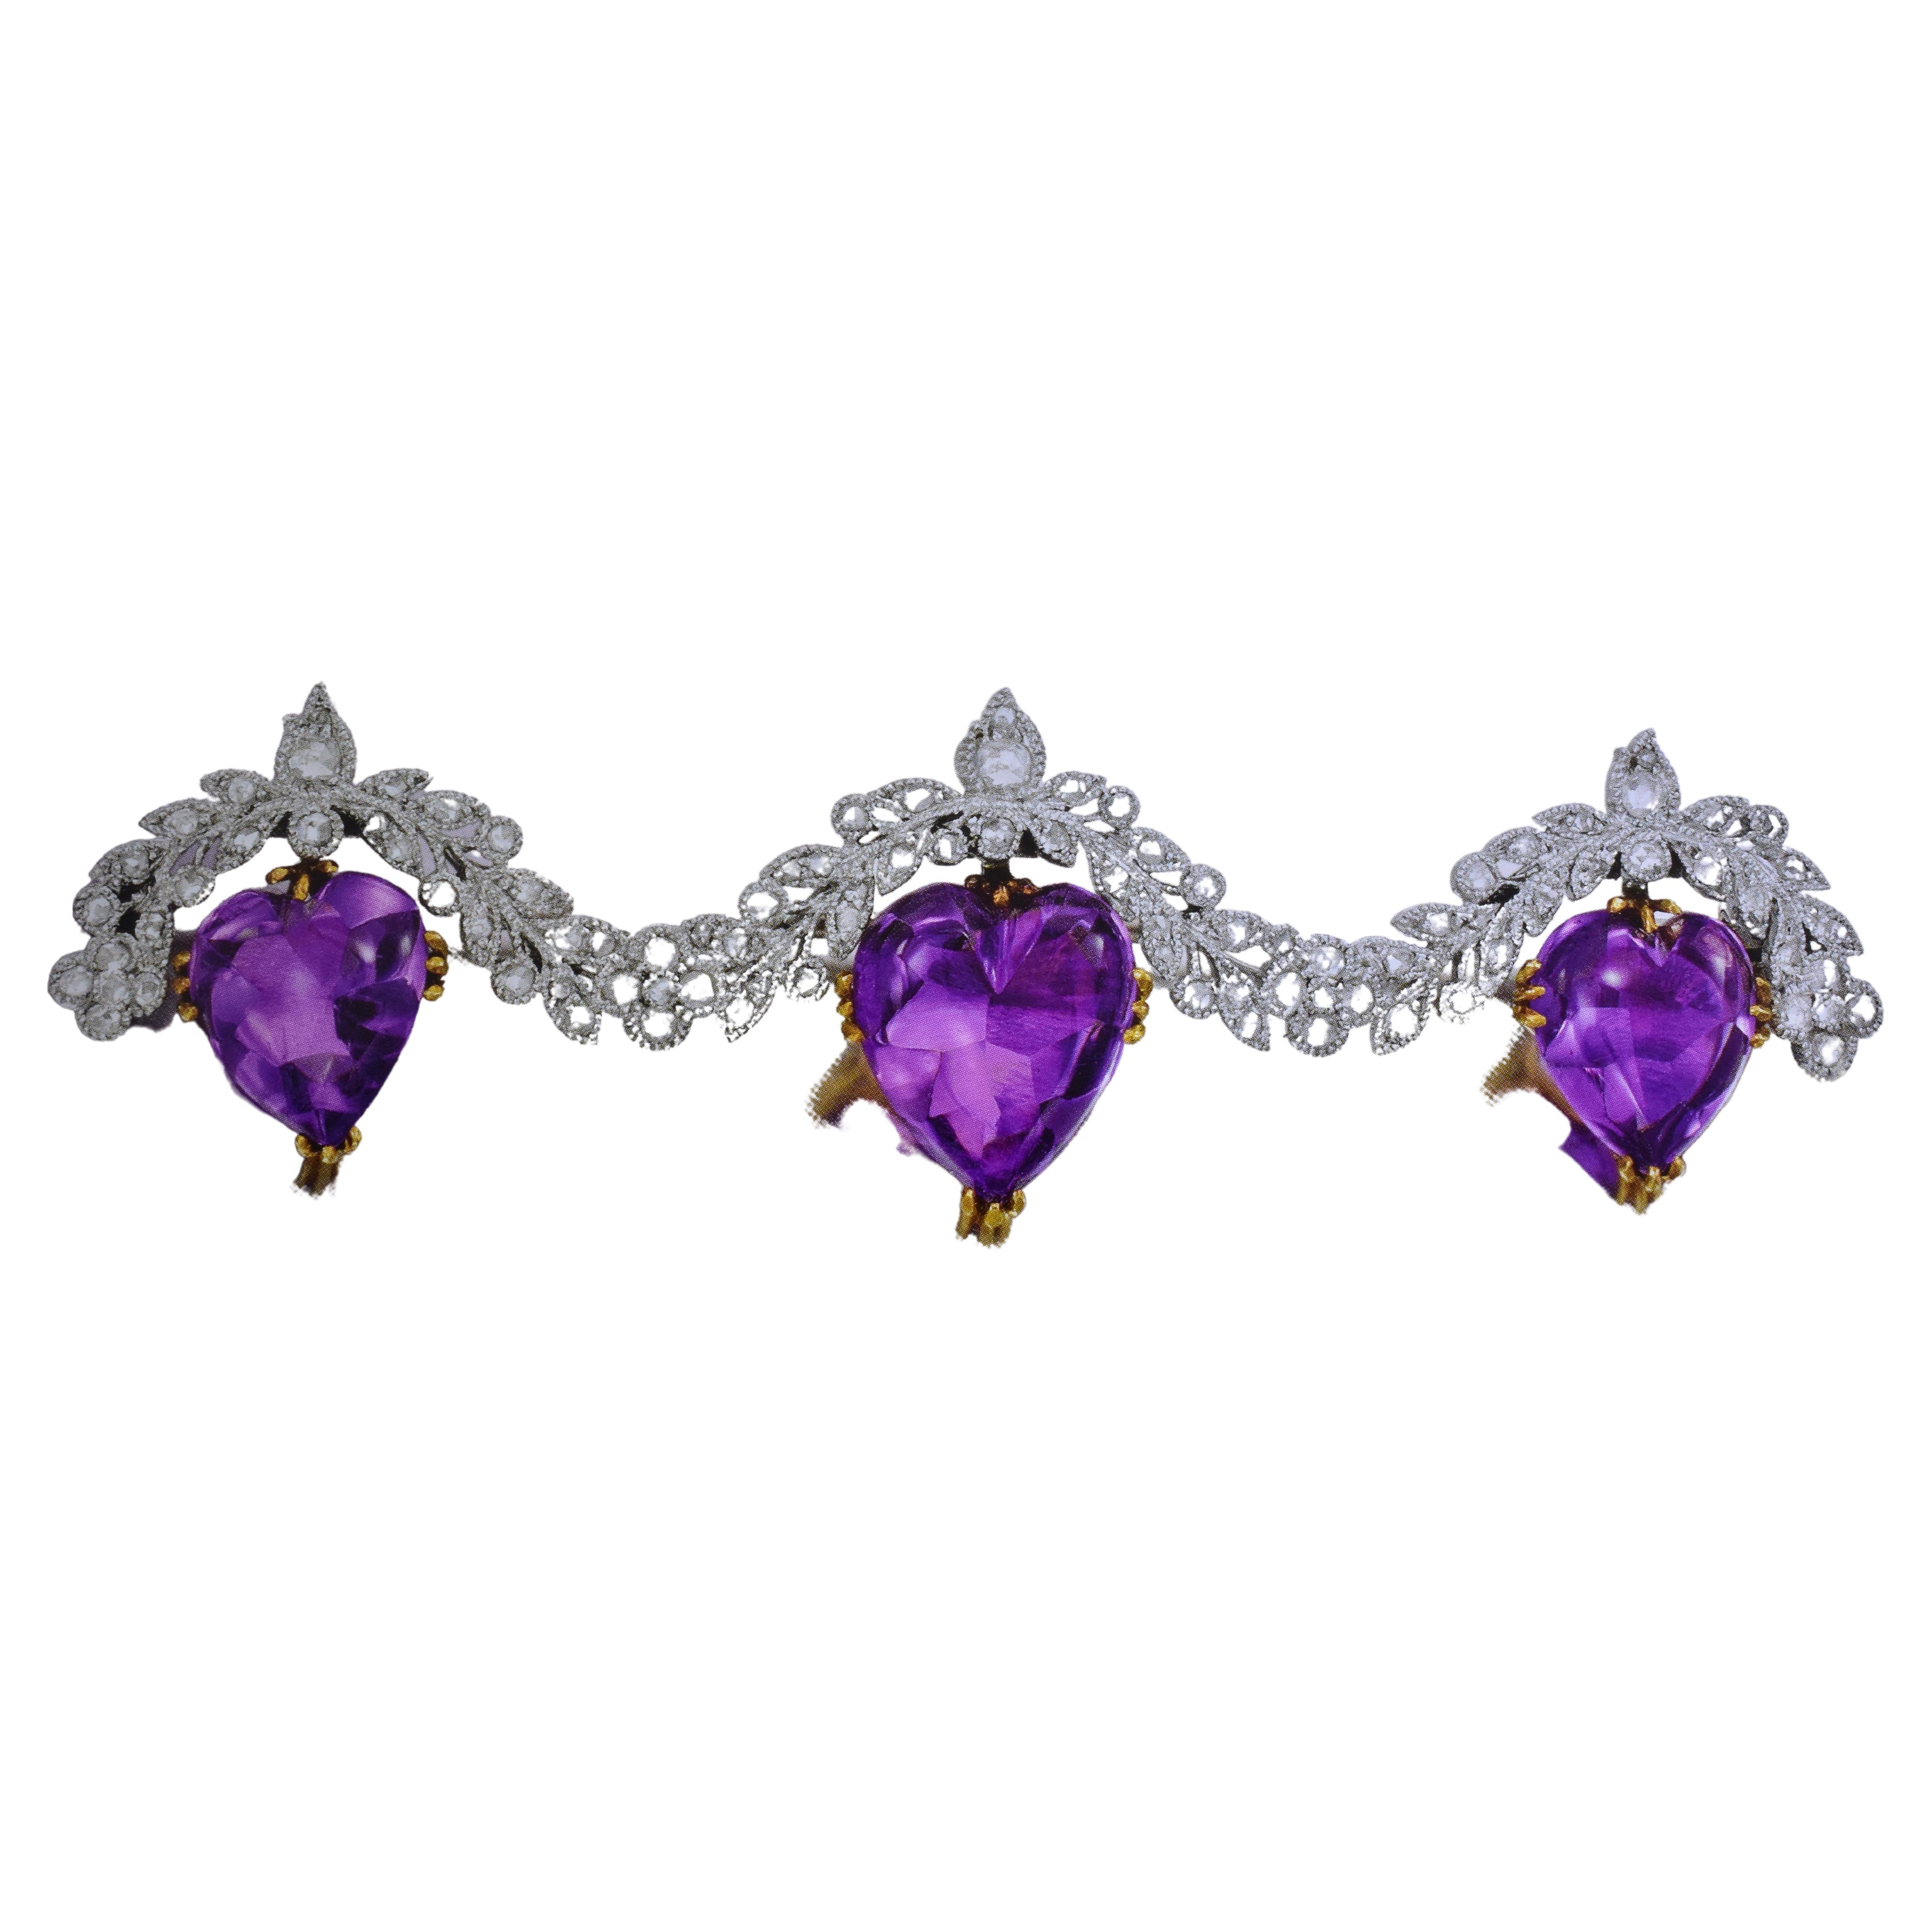 Antique Amethyst Large Brooch accented with Diamond Edwardian, circa 1910